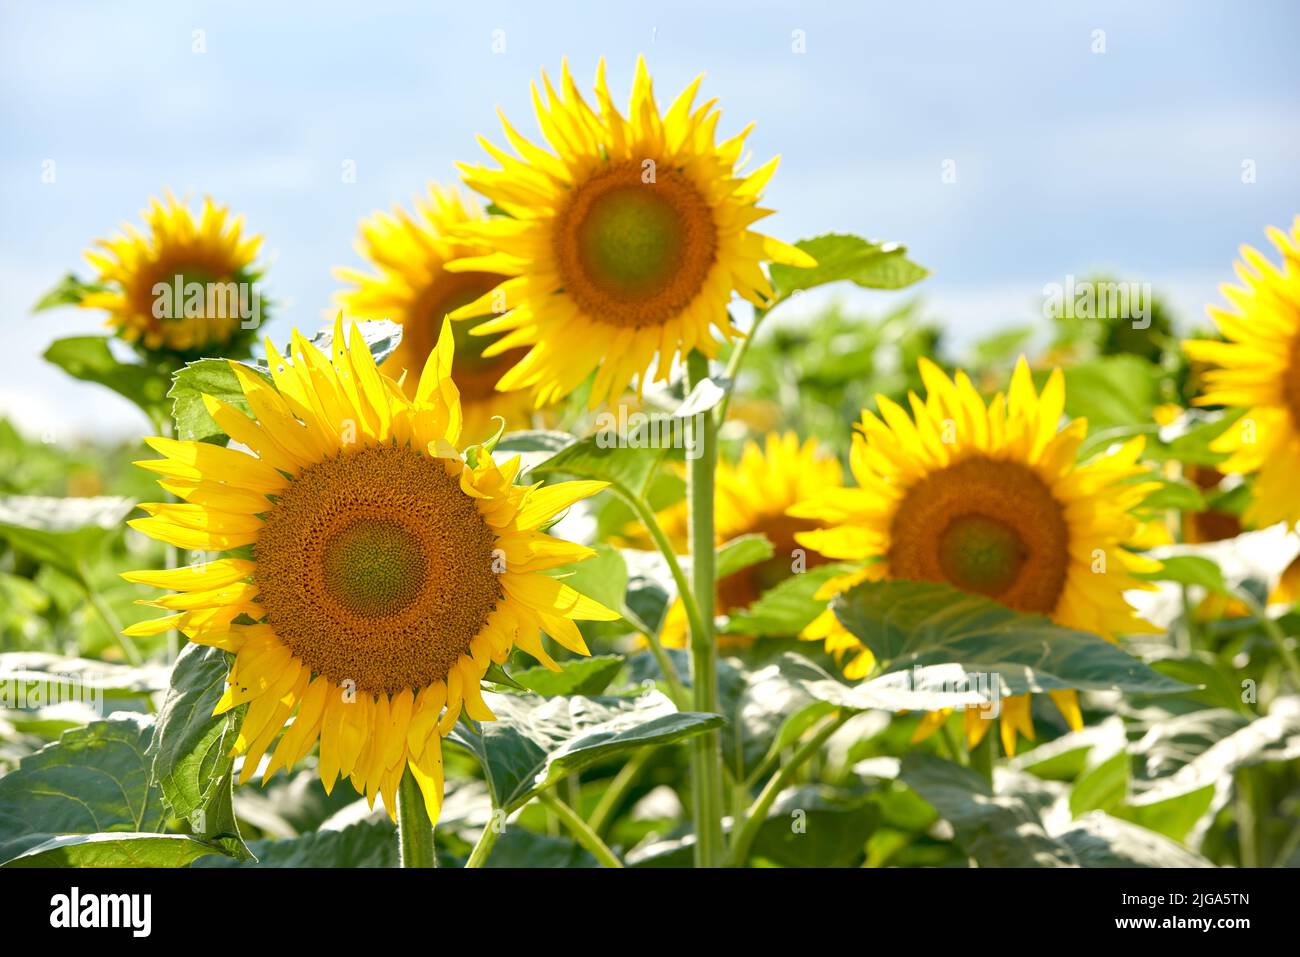 Sunflowers growing in a garden against a blurred nature background in summer. Yellow flowering plants beginning to bloom on a green field in spring Stock Photo